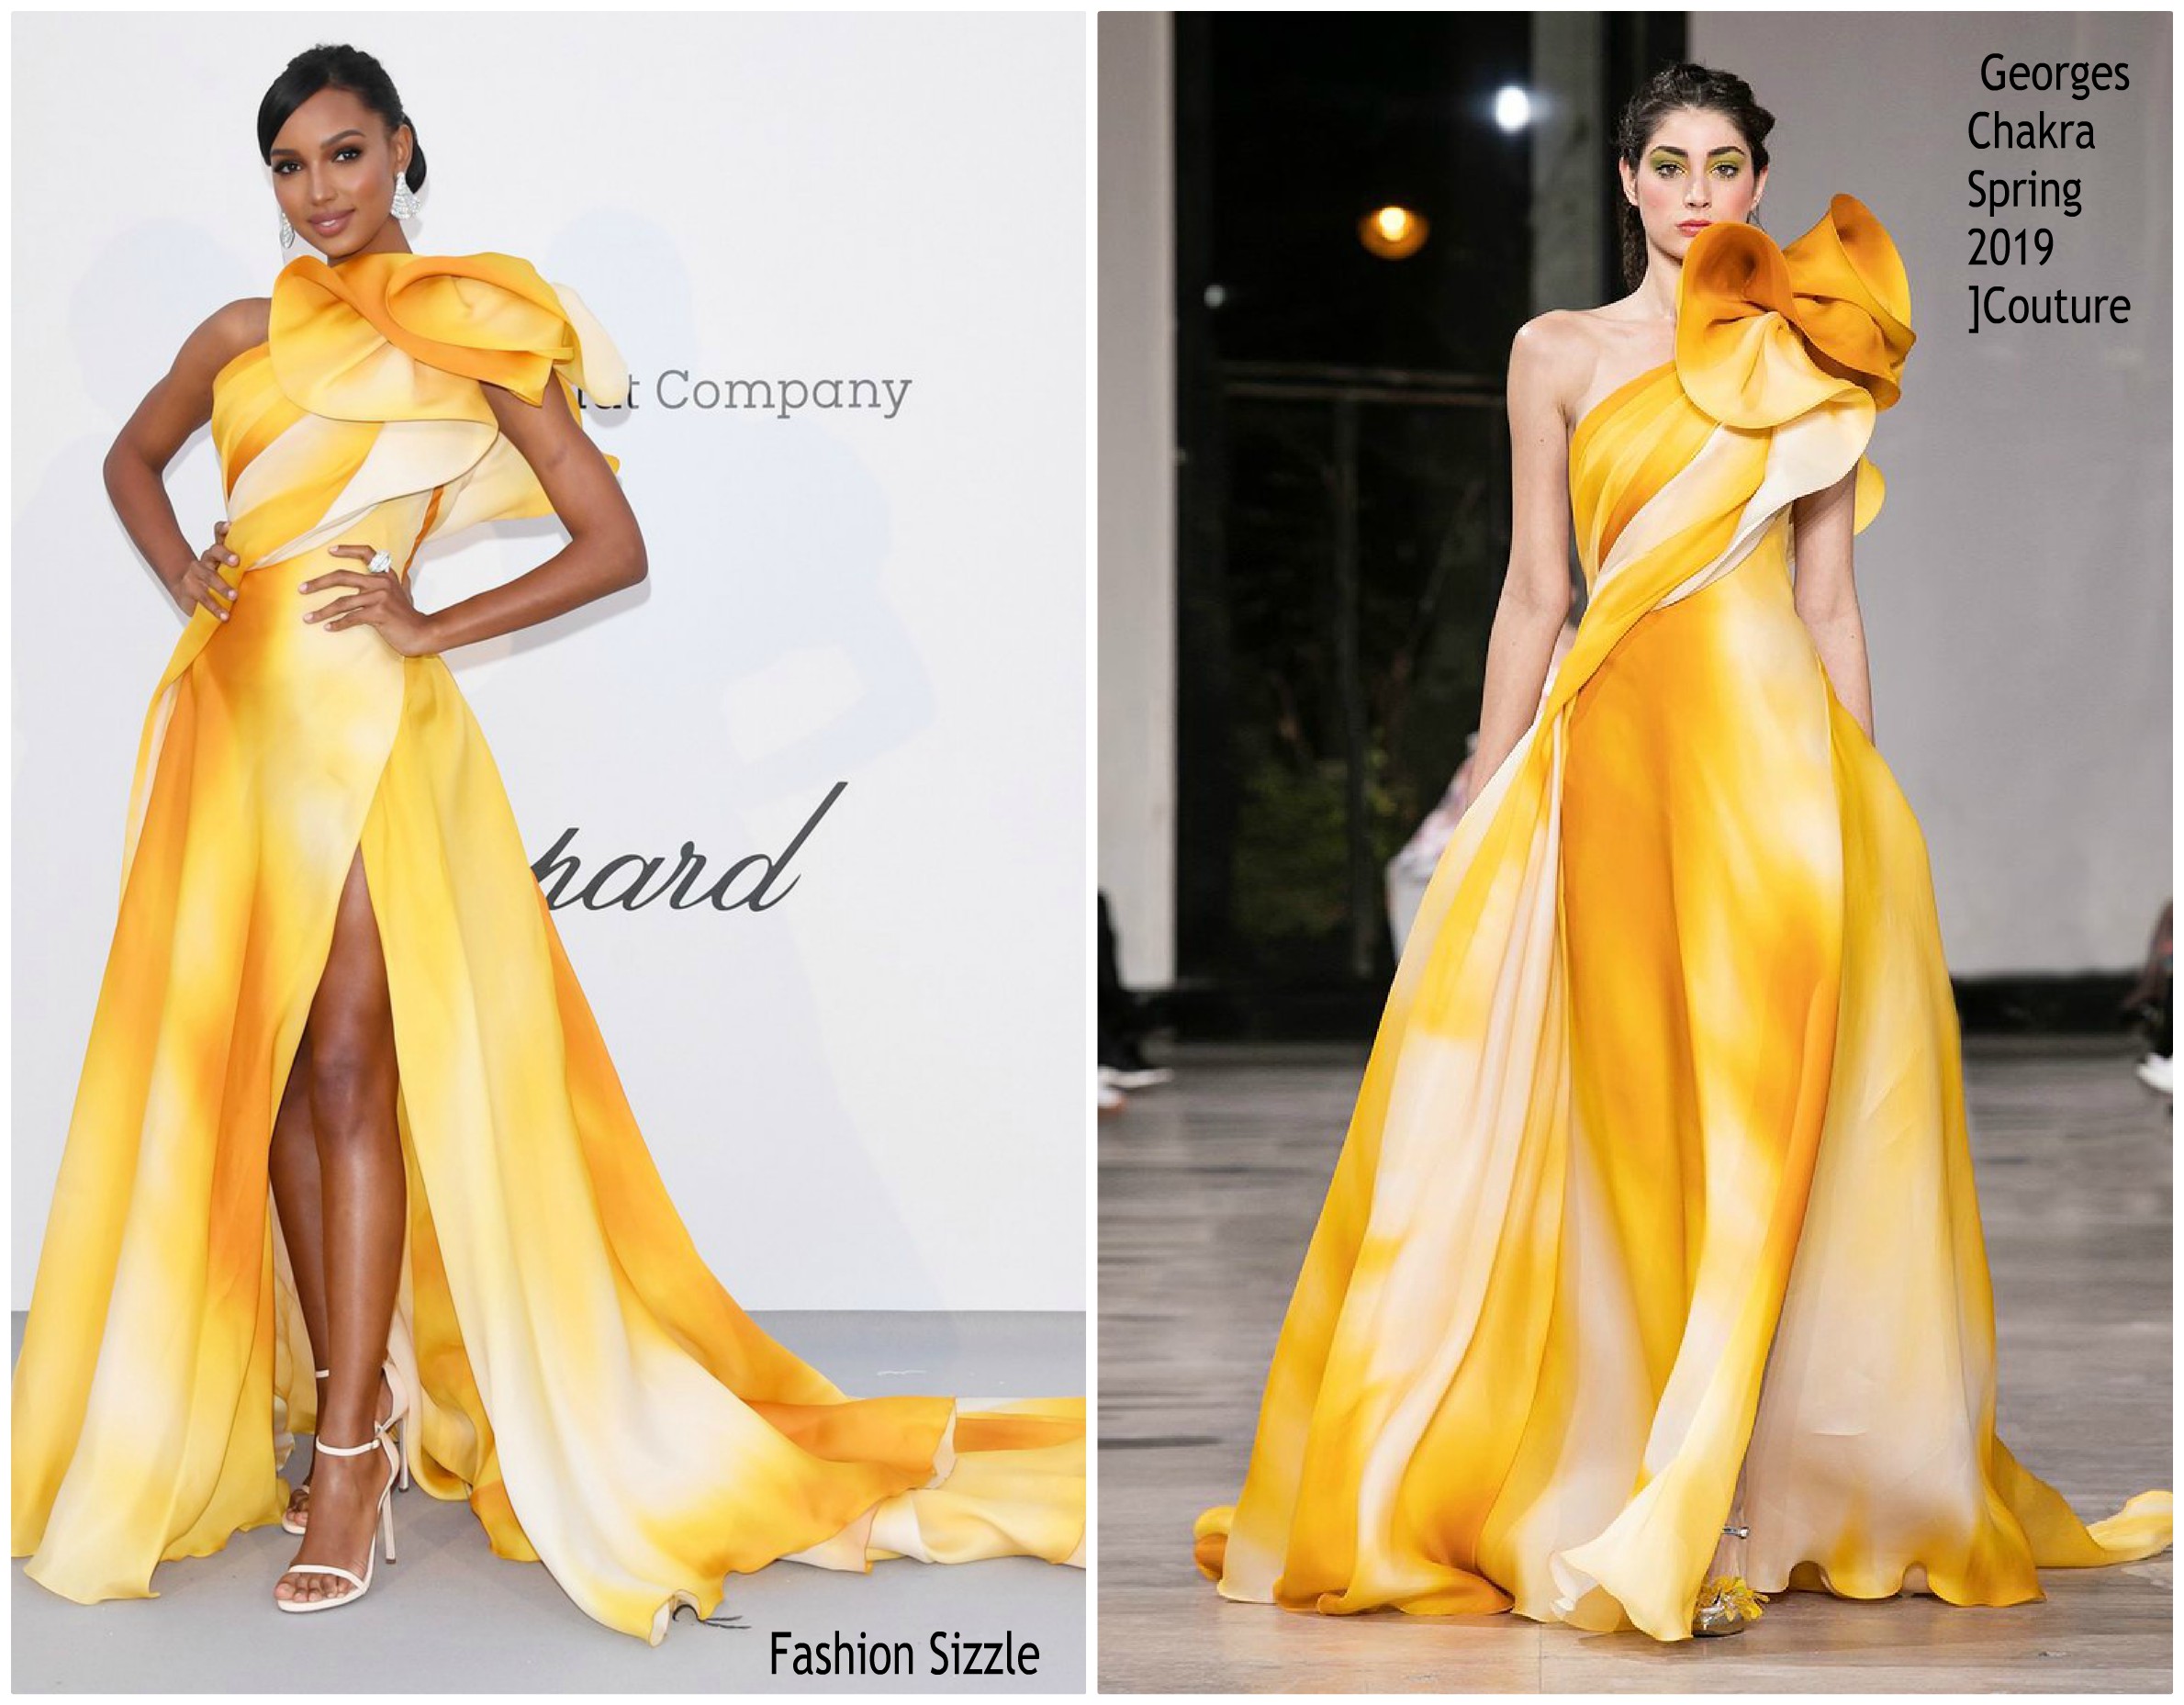 jasmine-tookes-in-georges-chakra-couture-2019-amfar-cannes-gala